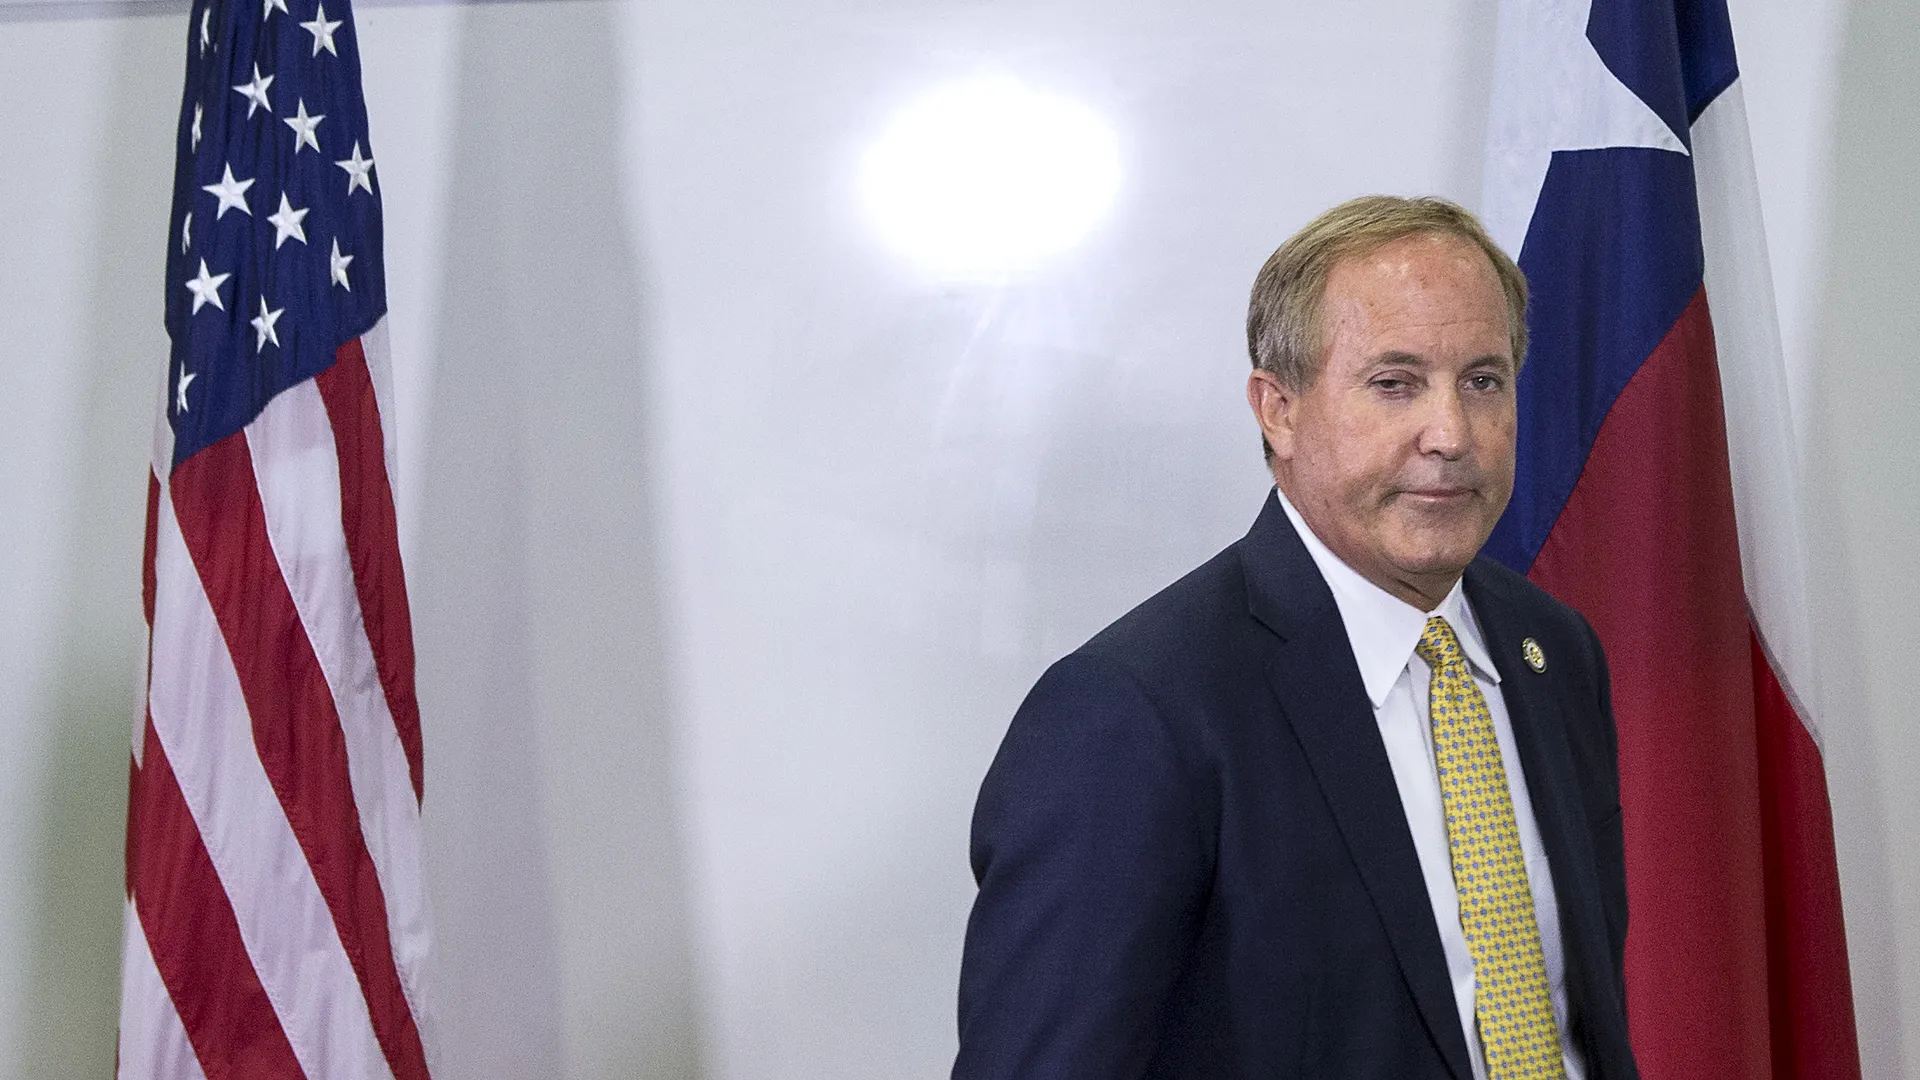 The Texas Attorney General threatened impeachment